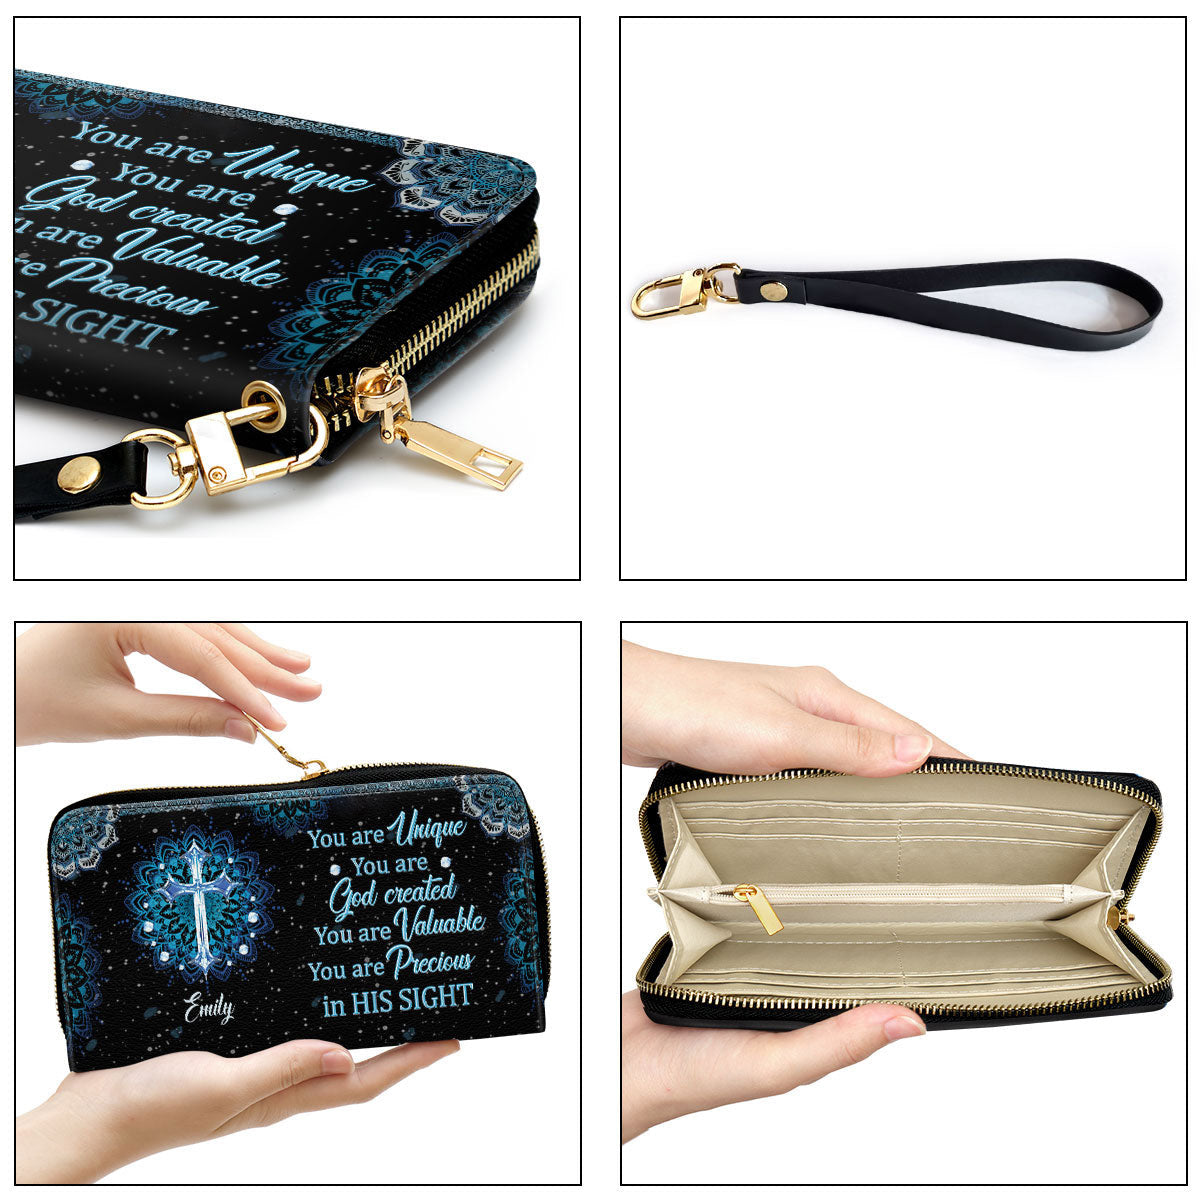 You Are Valuable Awesome Clutch Purse For Women - Personalized Name - Christian Gifts For Women